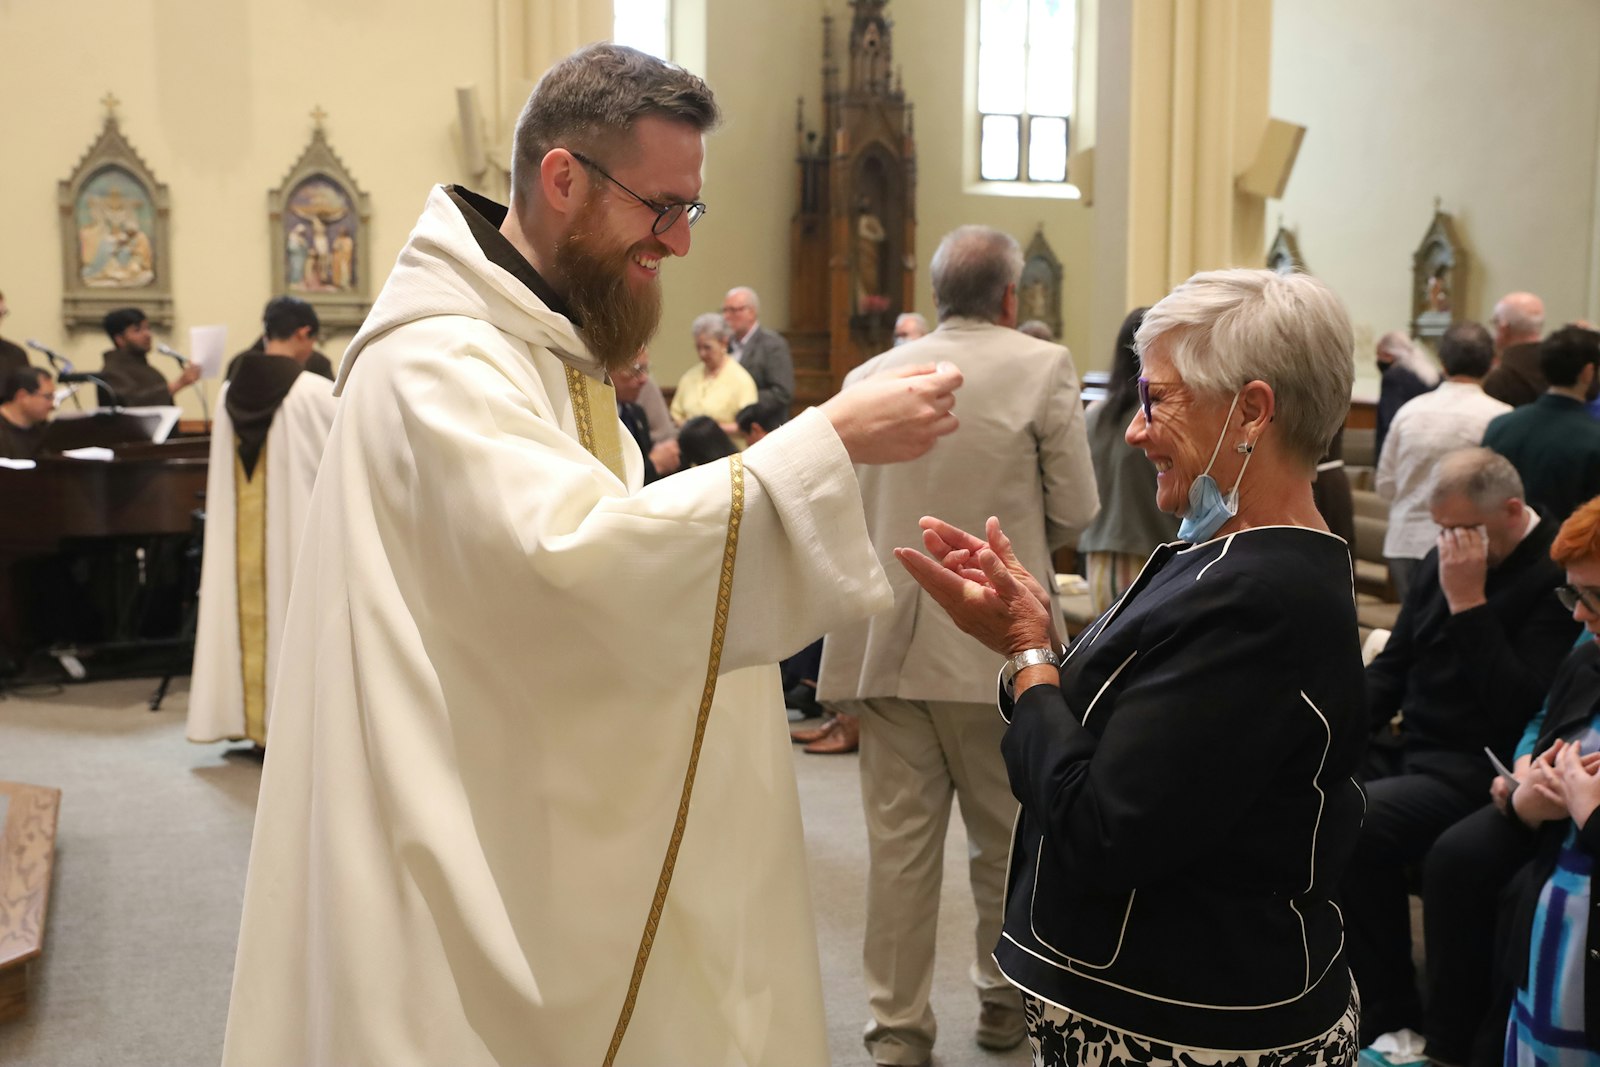 Fr. Skowron smiles broadly as he offers Communion to friends, family and well-wishers during his ordination Mass on June 4 at St. Bonaventure Monastery in Detroit.